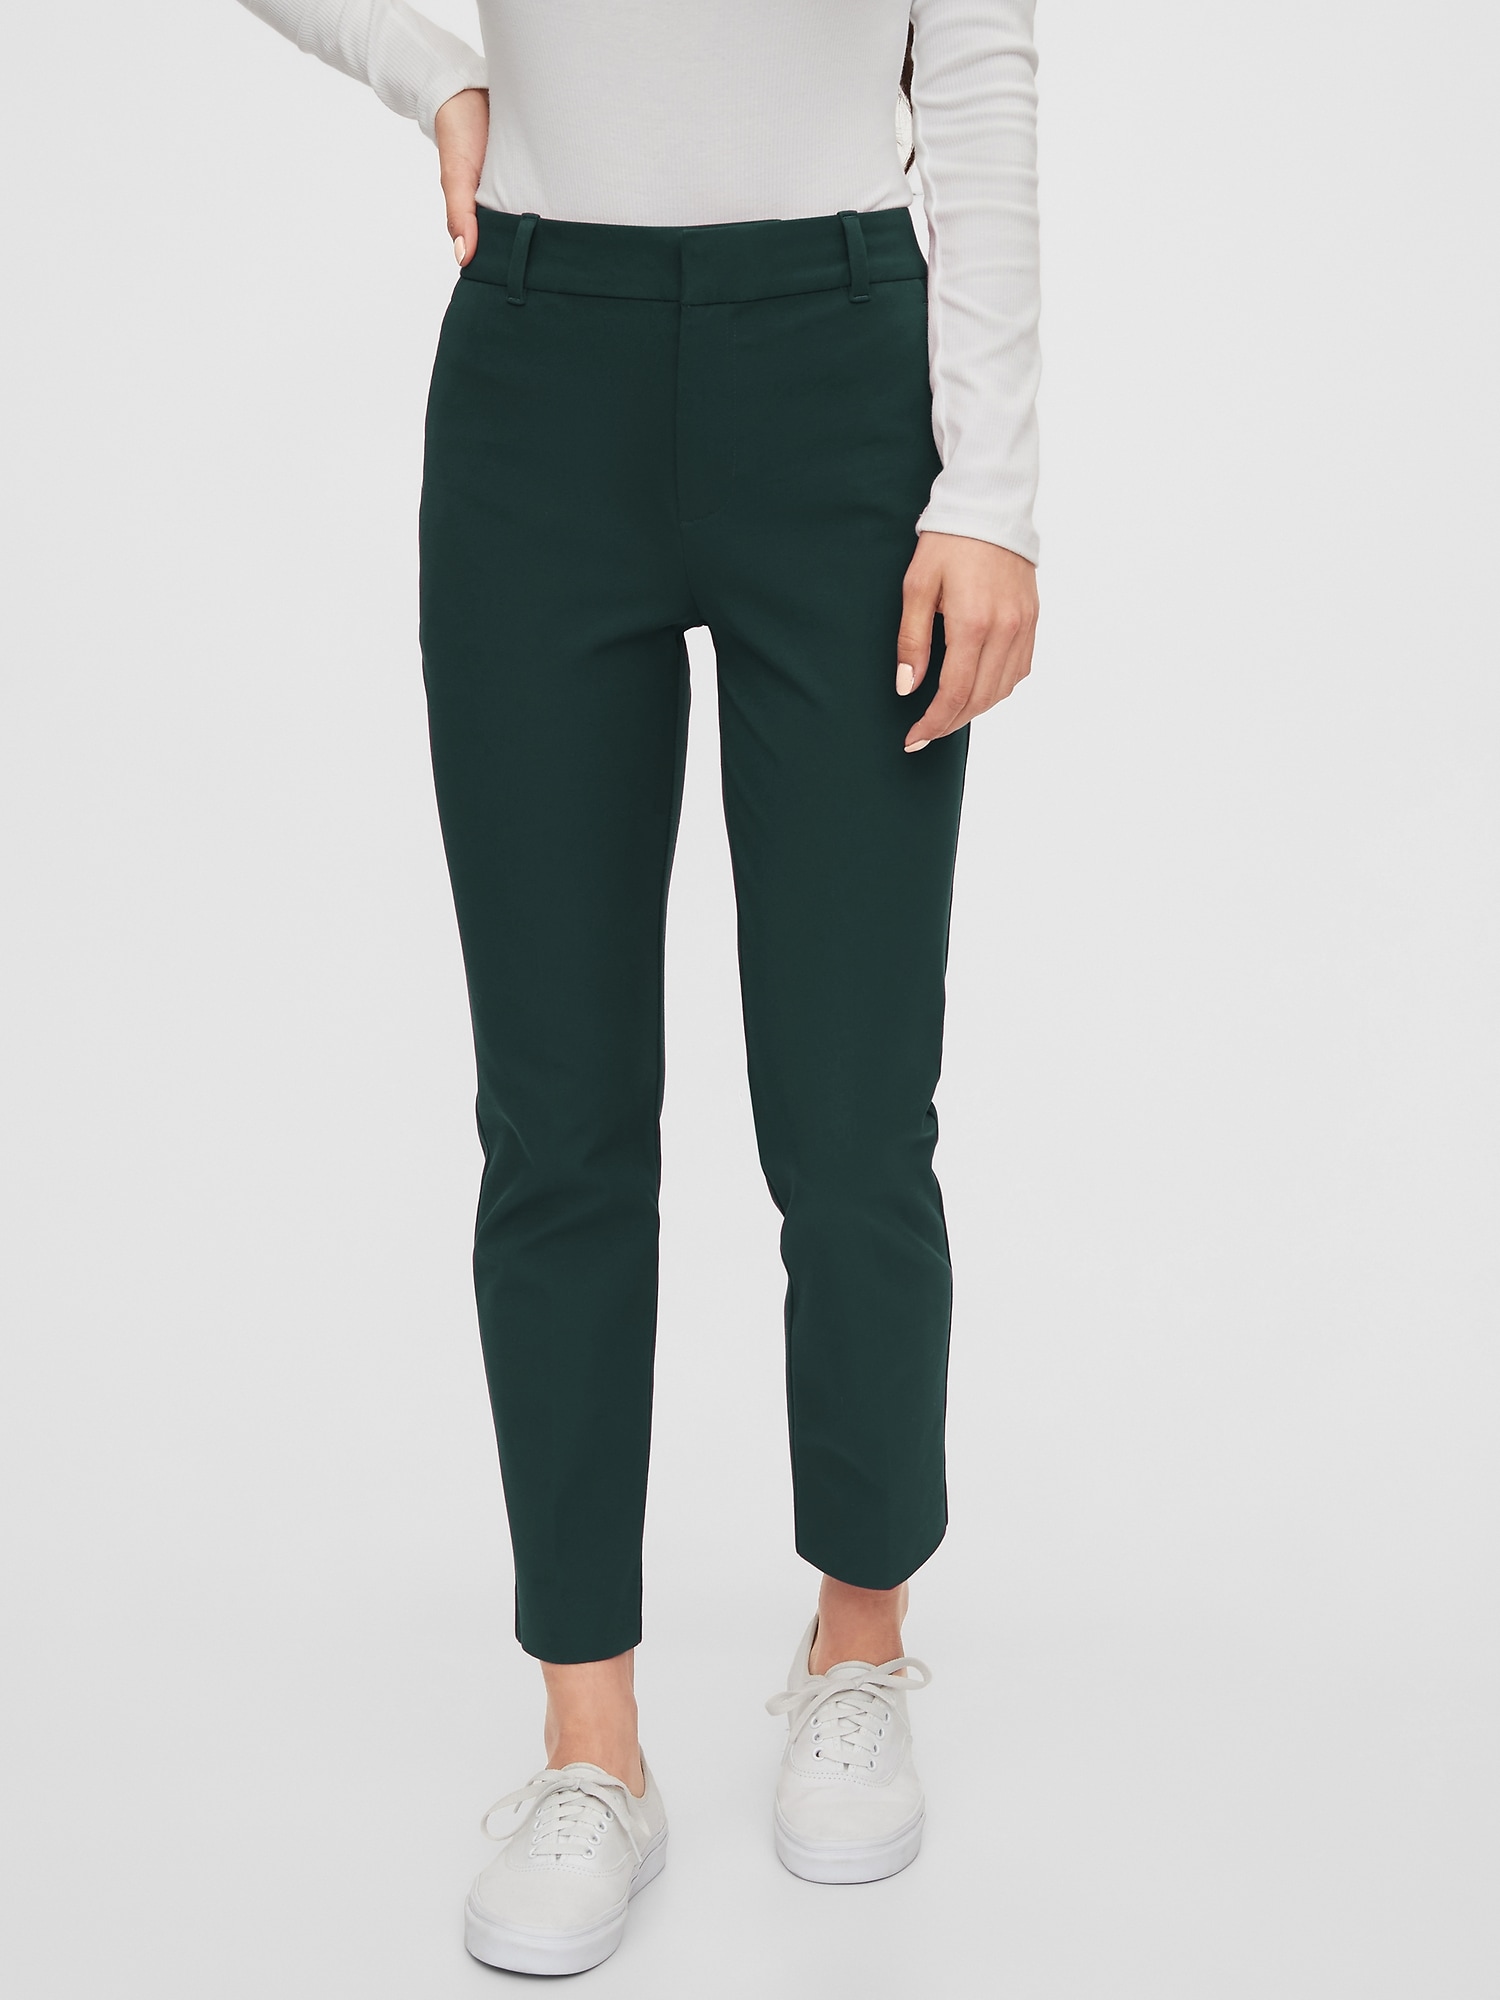 Preview Slim Ankle Pants